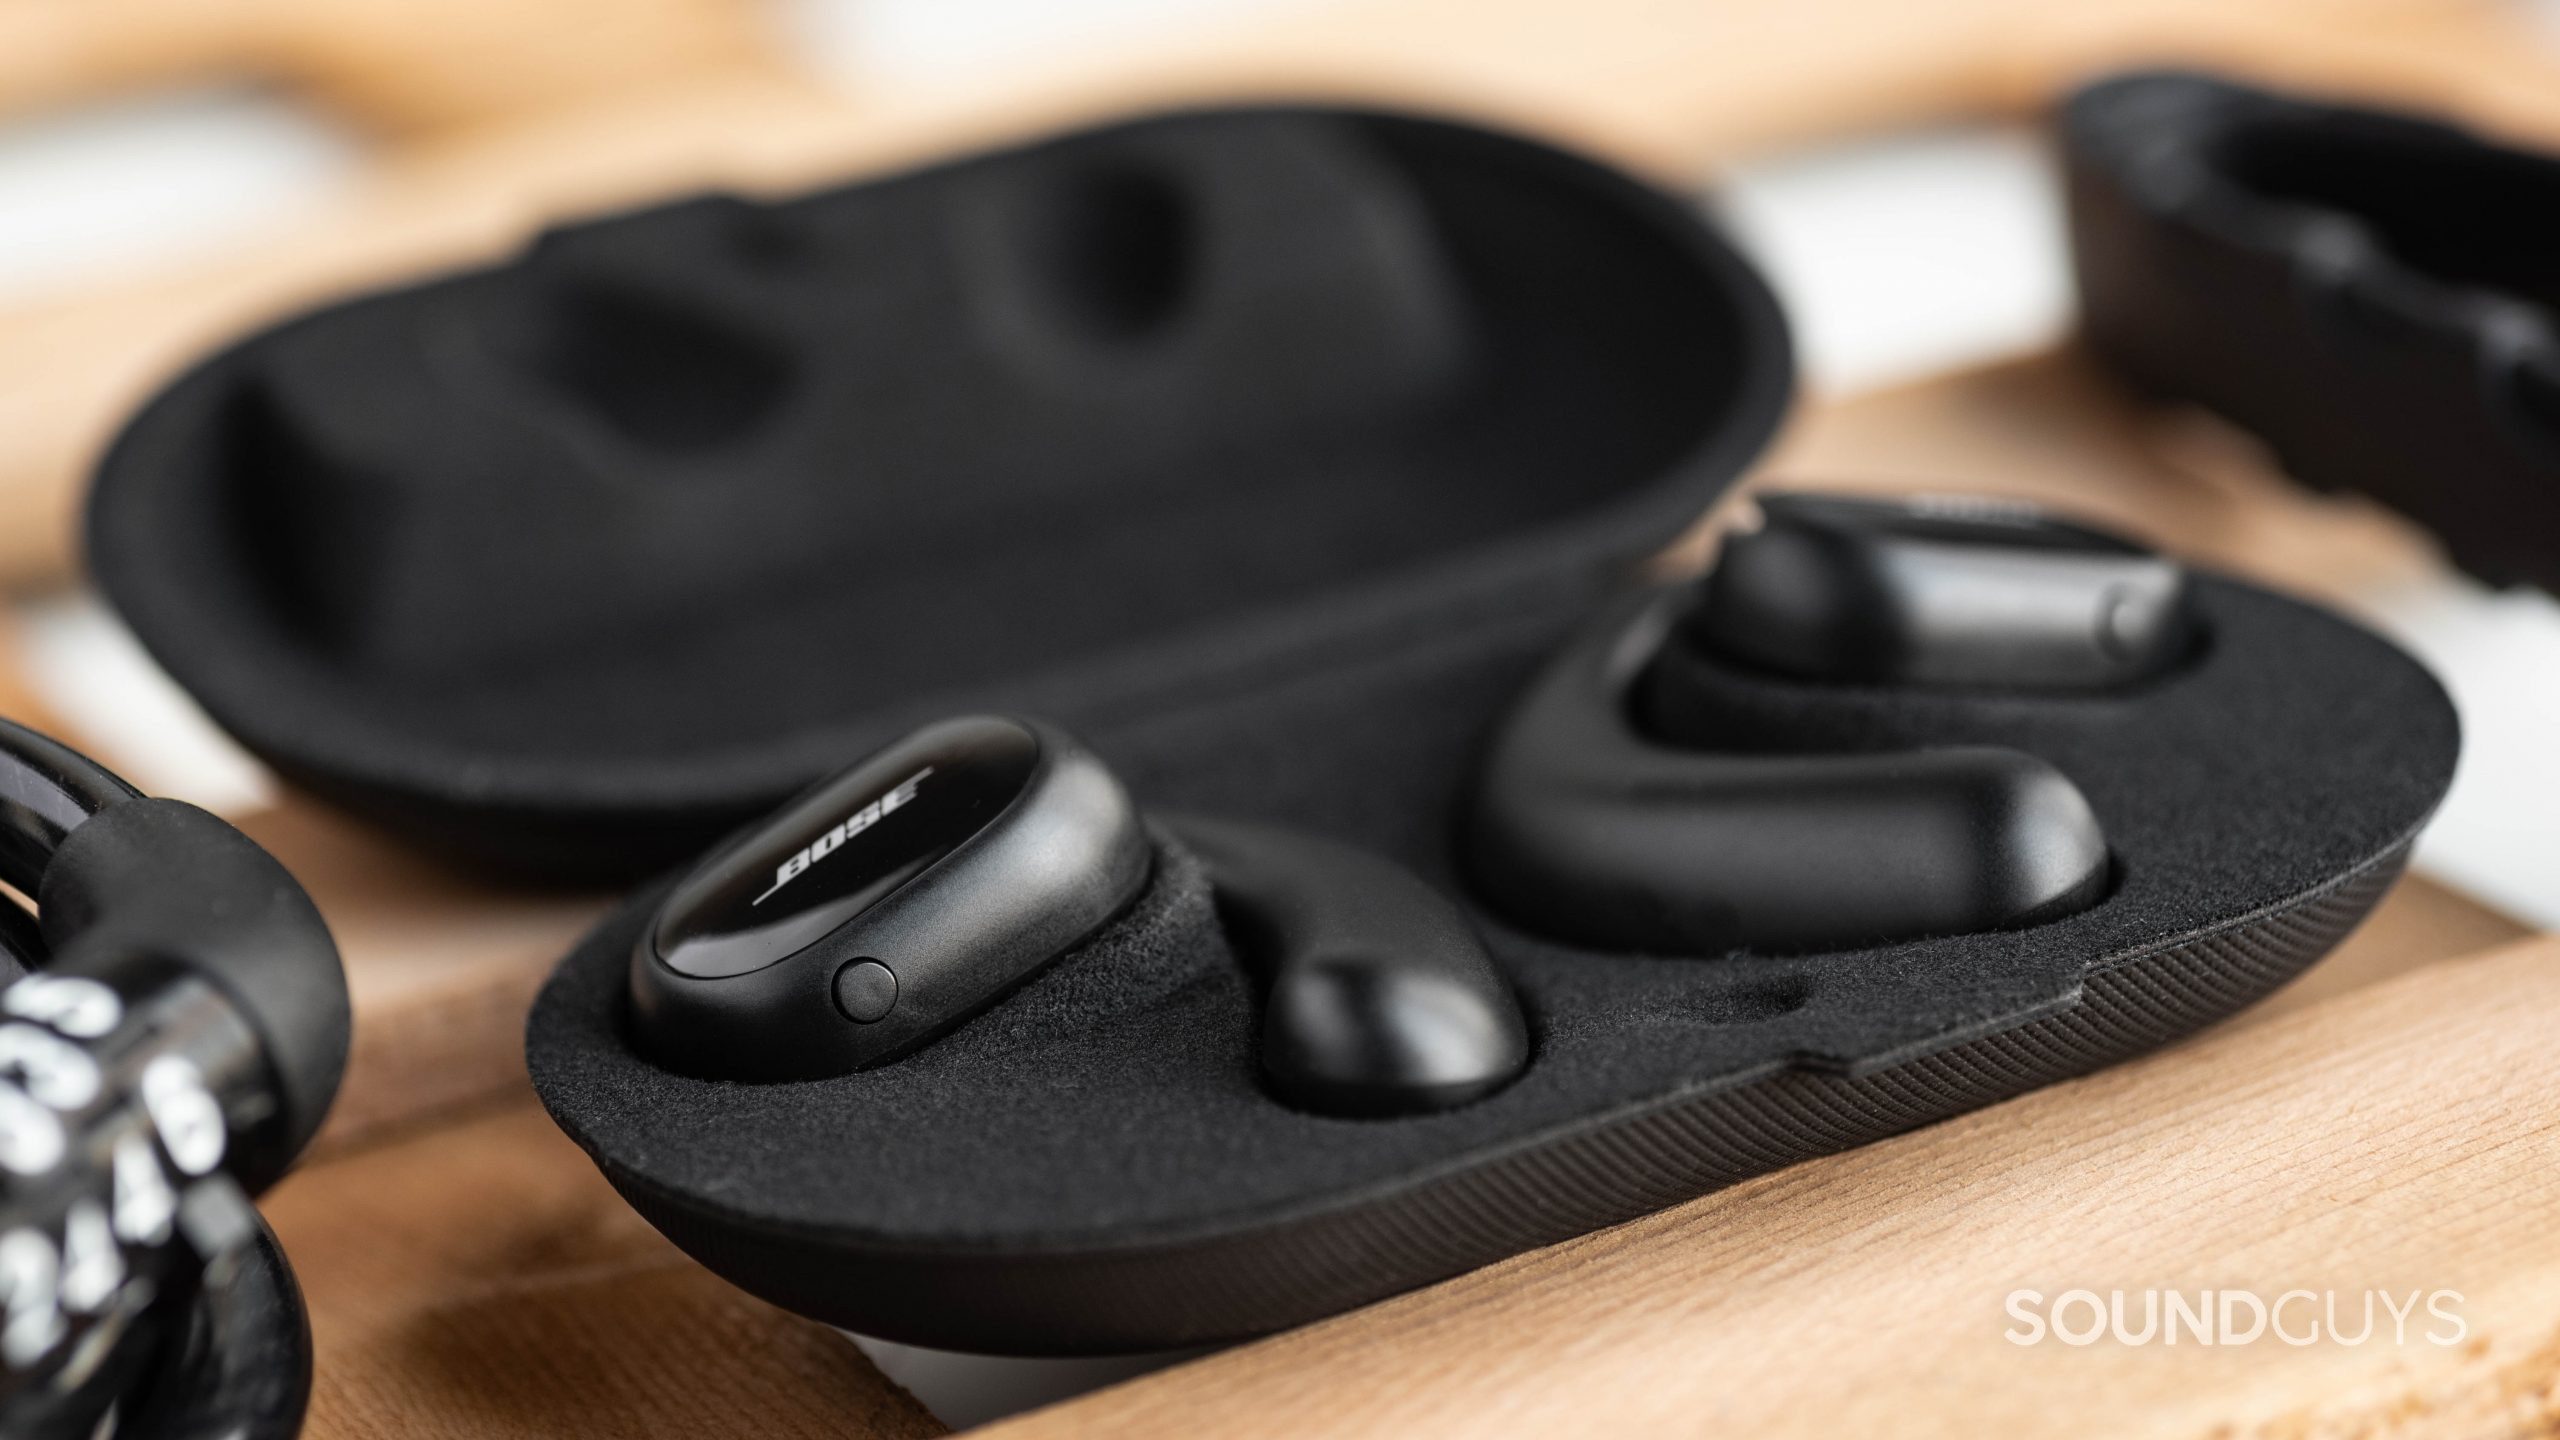 The Bose Sport Open Earbuds in the open case with the left earbud button in clear view.